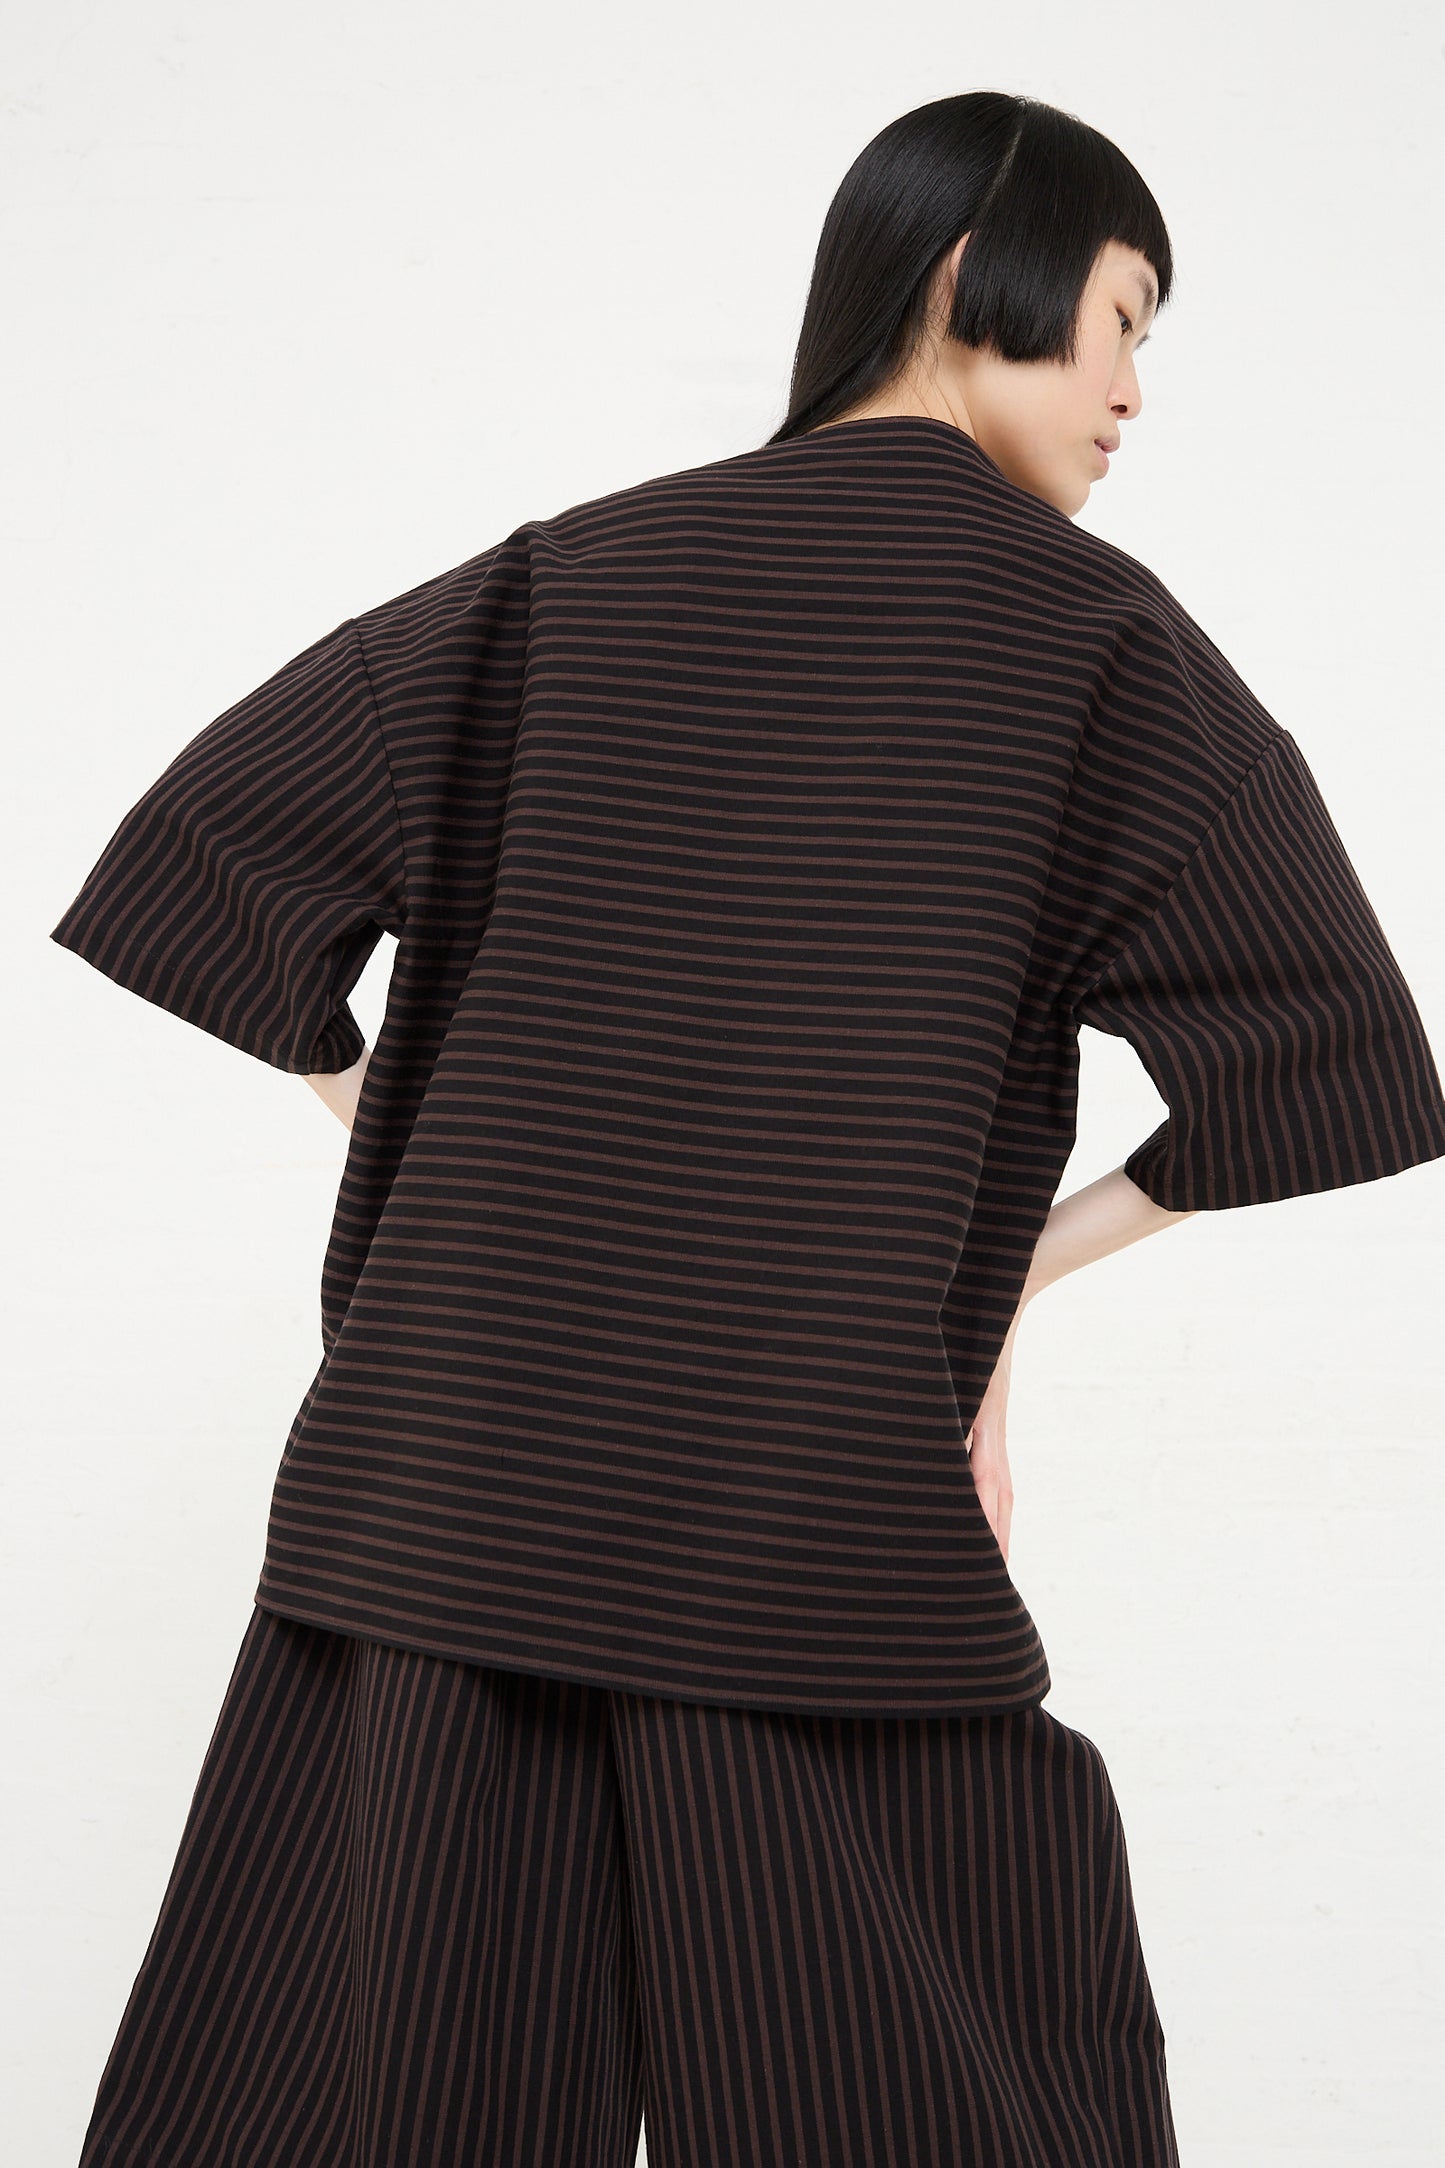 Woman from behind wearing a Rachel Comey Ode Top in Black with a boatneck collar and matching trousers.